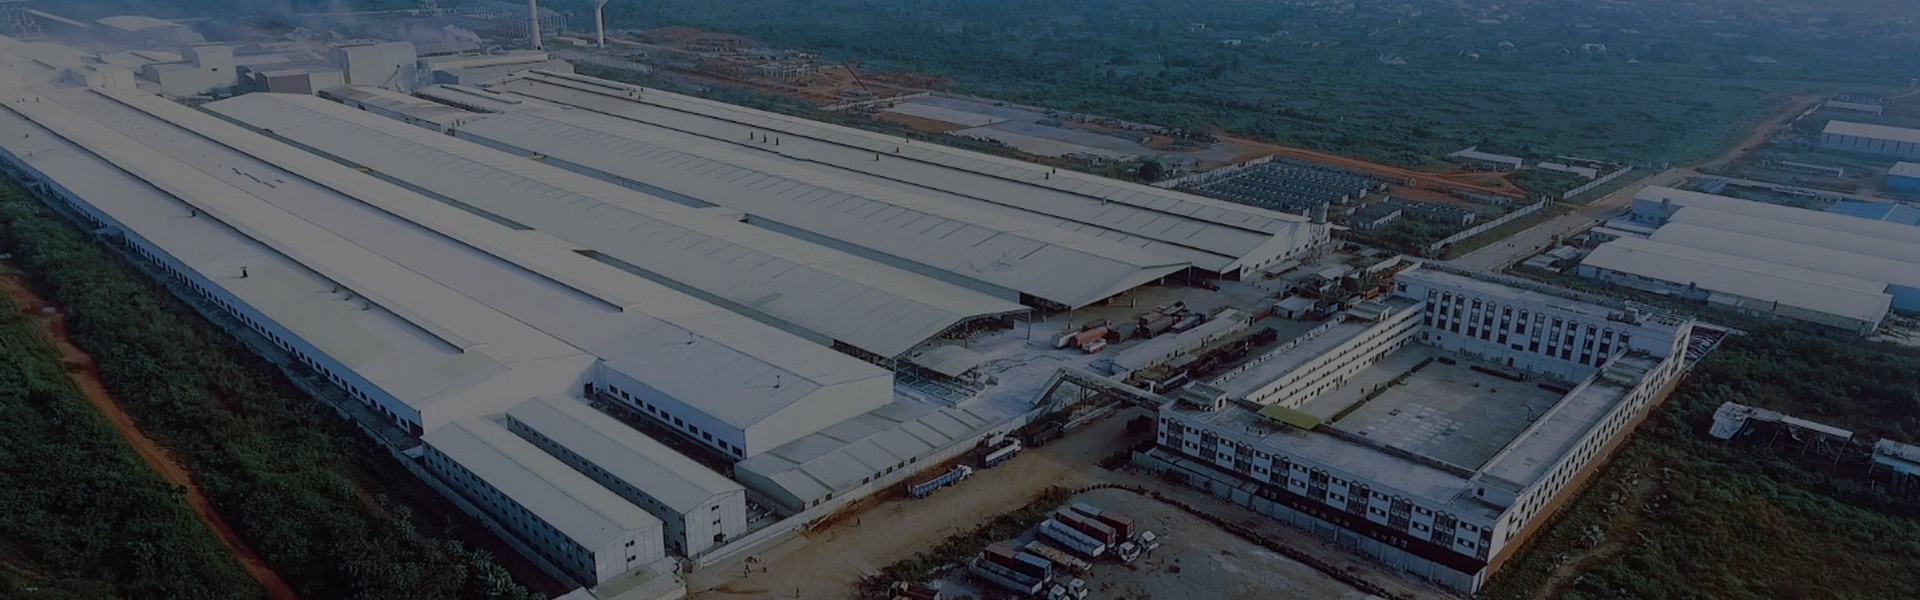 Goodwill Ceramic (Nigeria) FZE: Steel Structure Factory For Ceramic Industry In Africa -180,000sqm